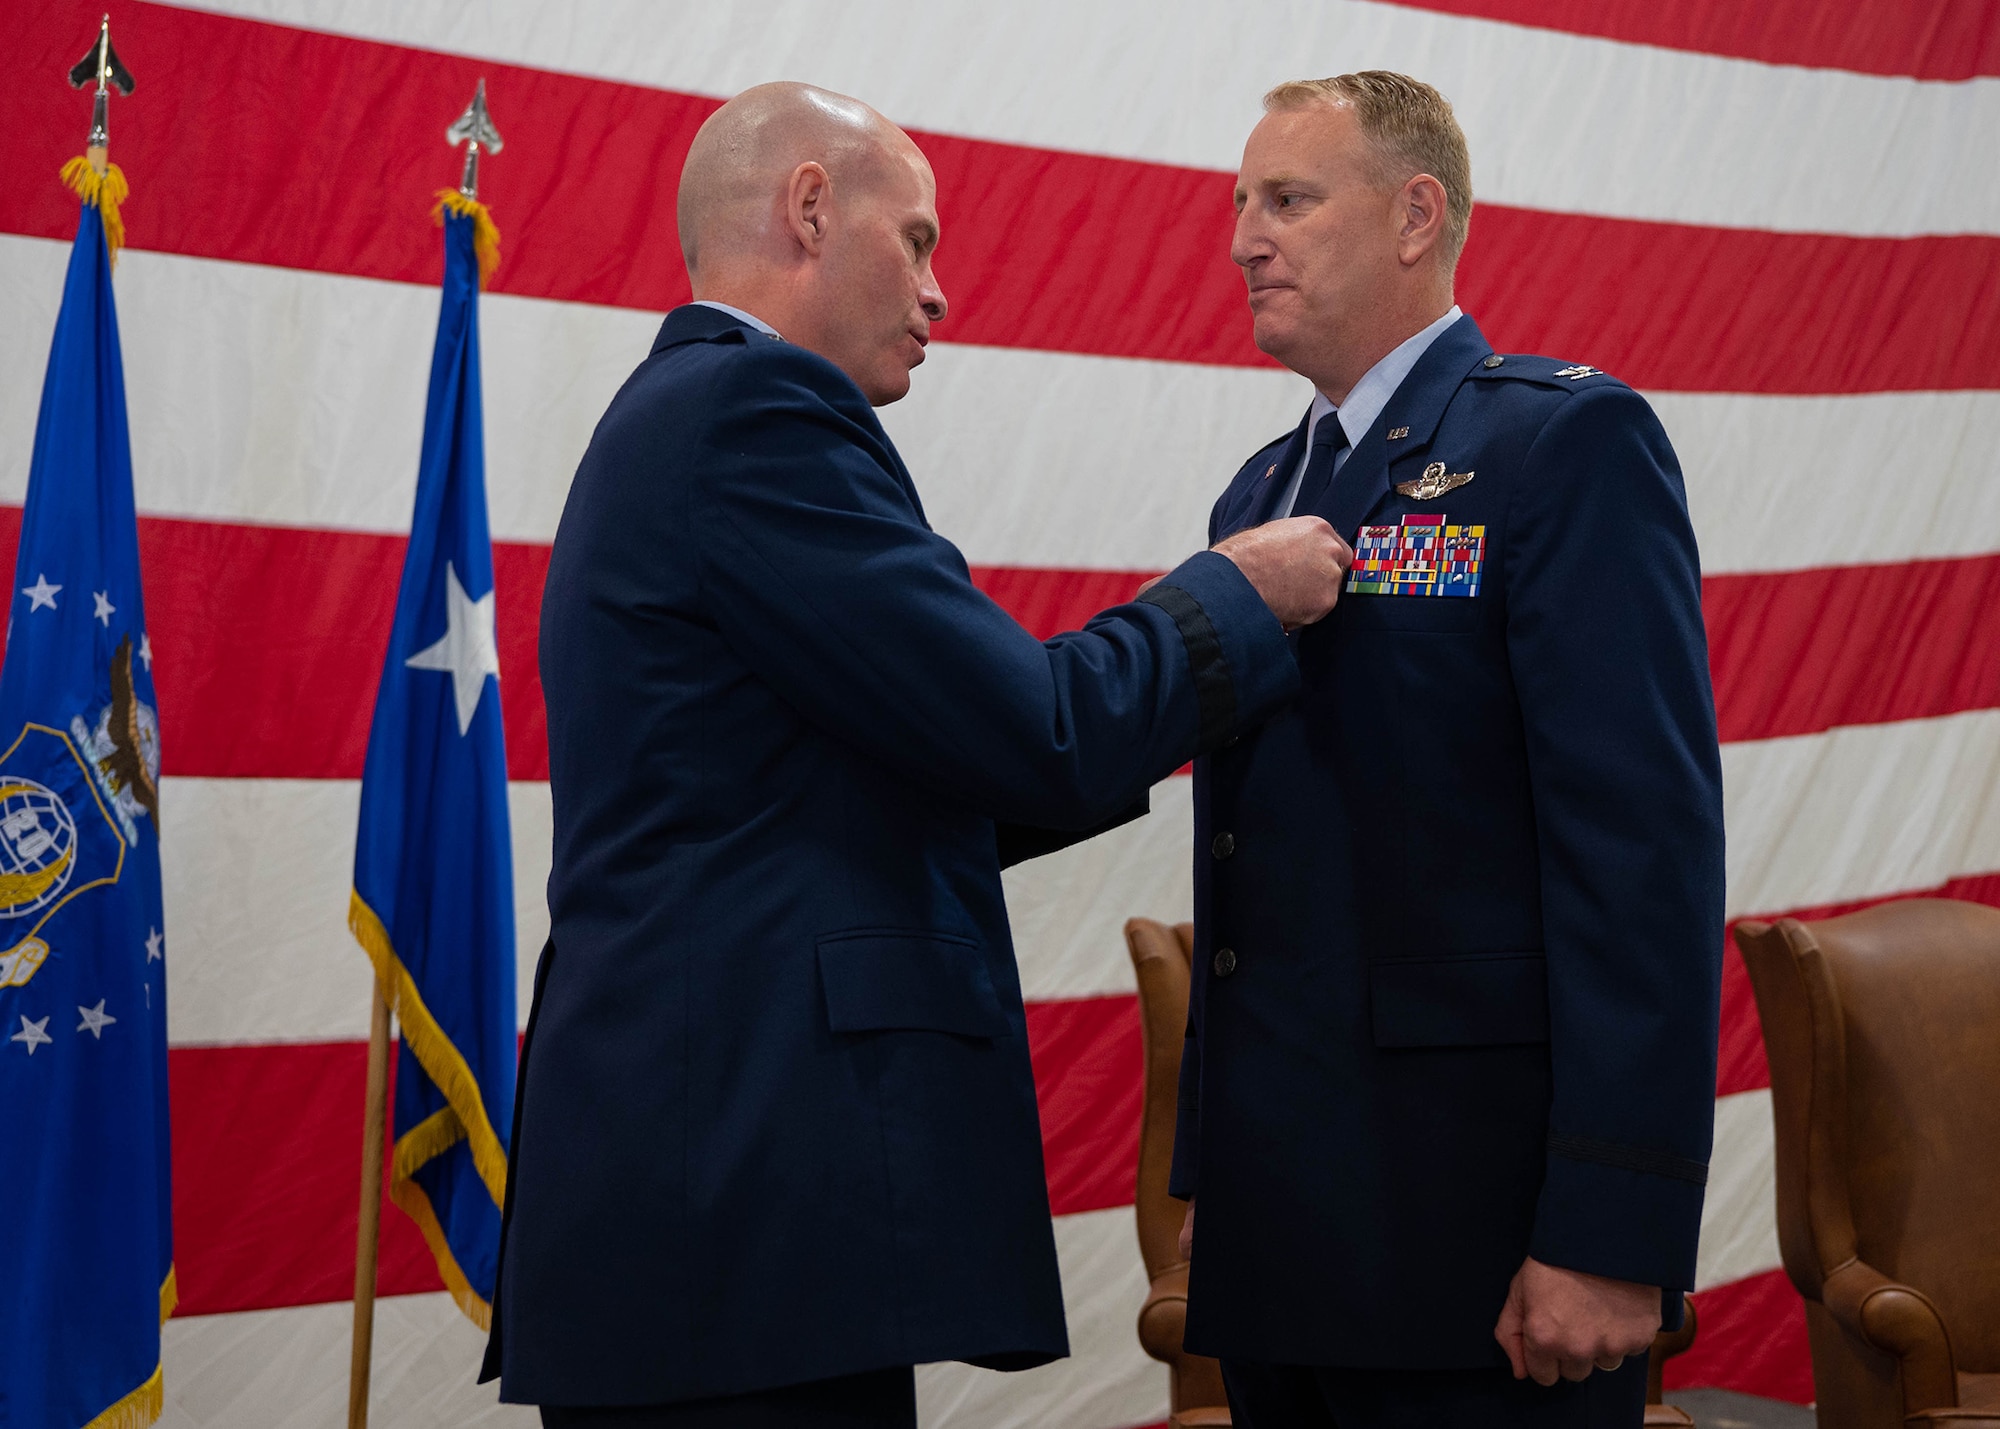 Air Force major general pins award to colonel